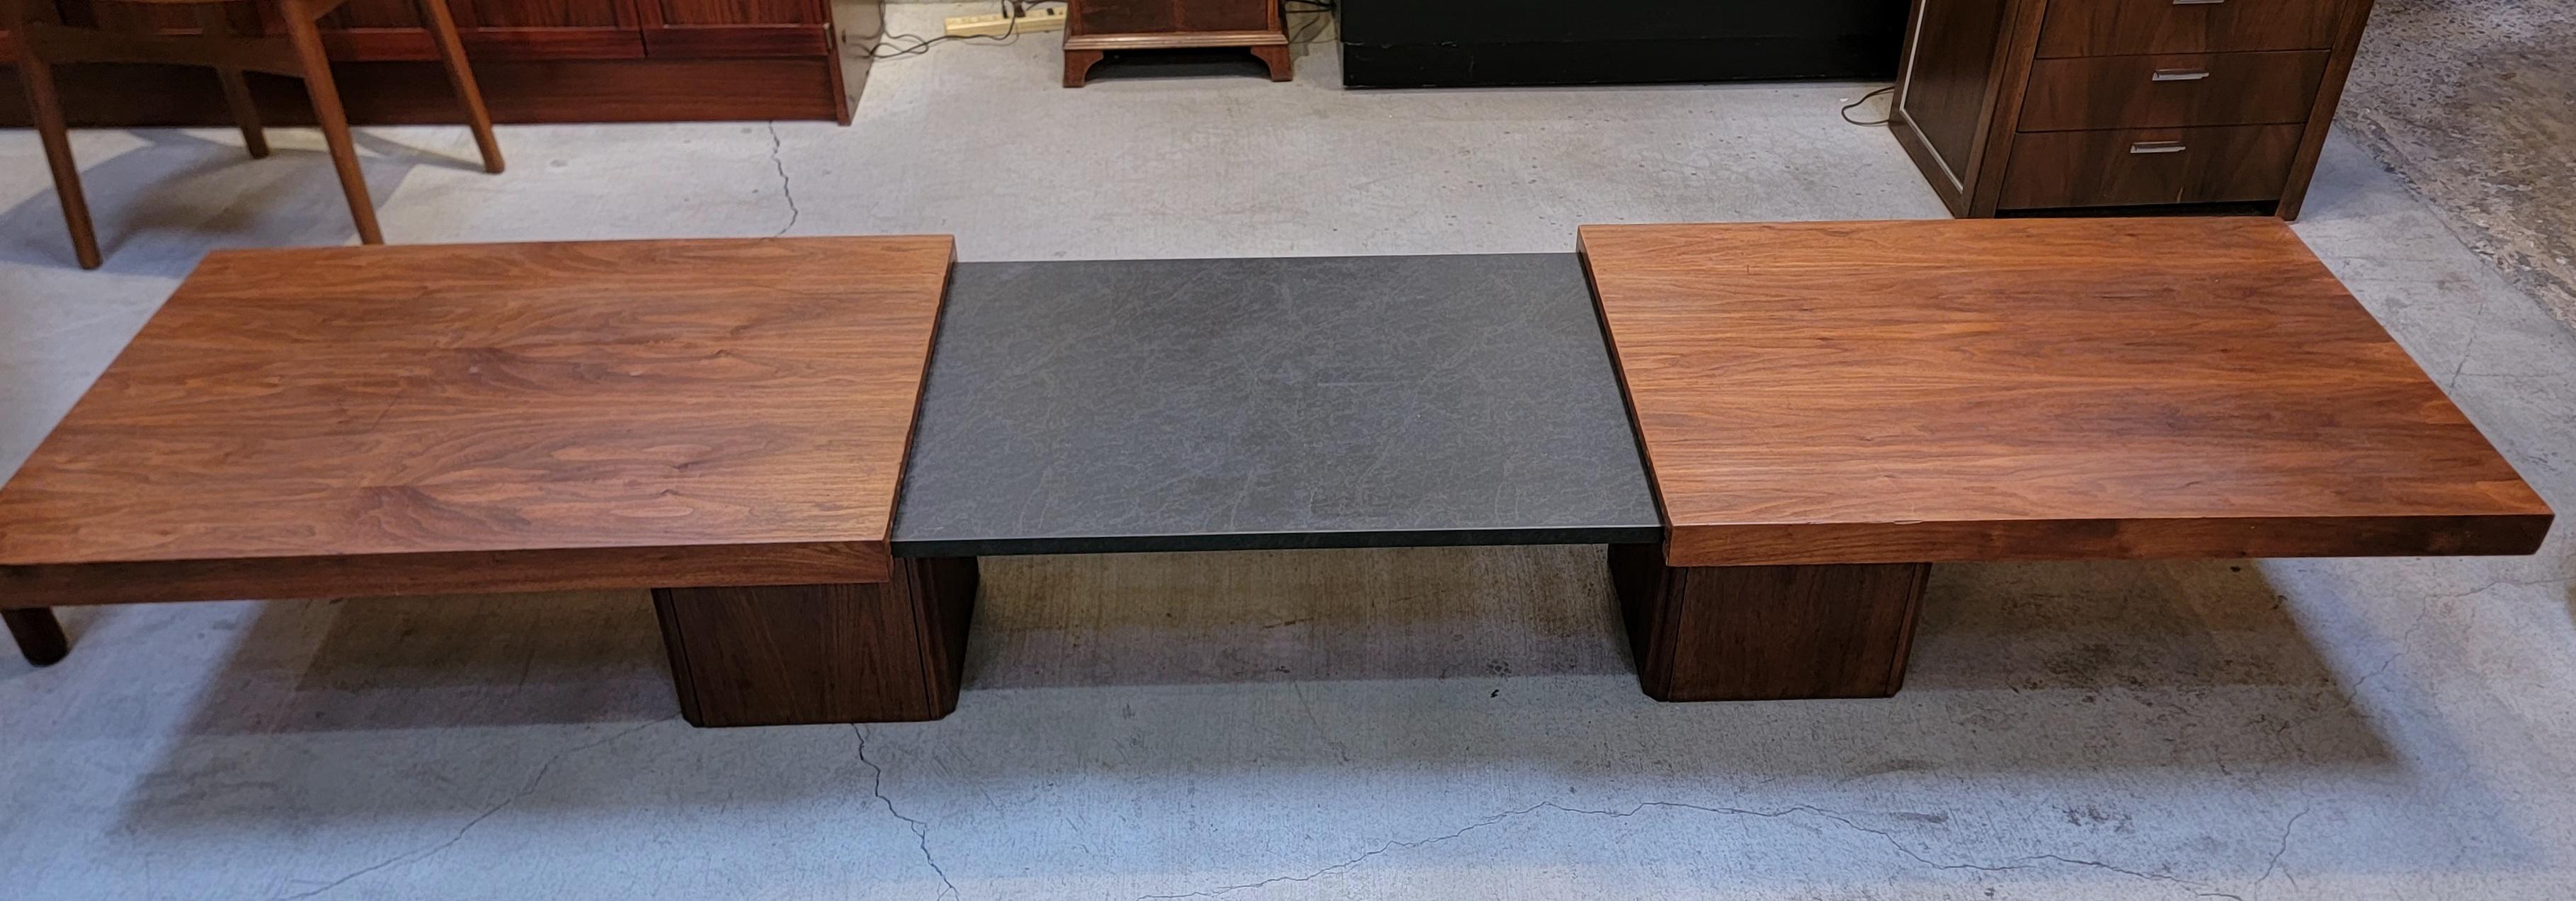 A Mid-Century Modern expanding coffee table designed by John Keal for Brown Saltman of California. Table adjusts between 66 inches to 95 inches in width. Good original condition.